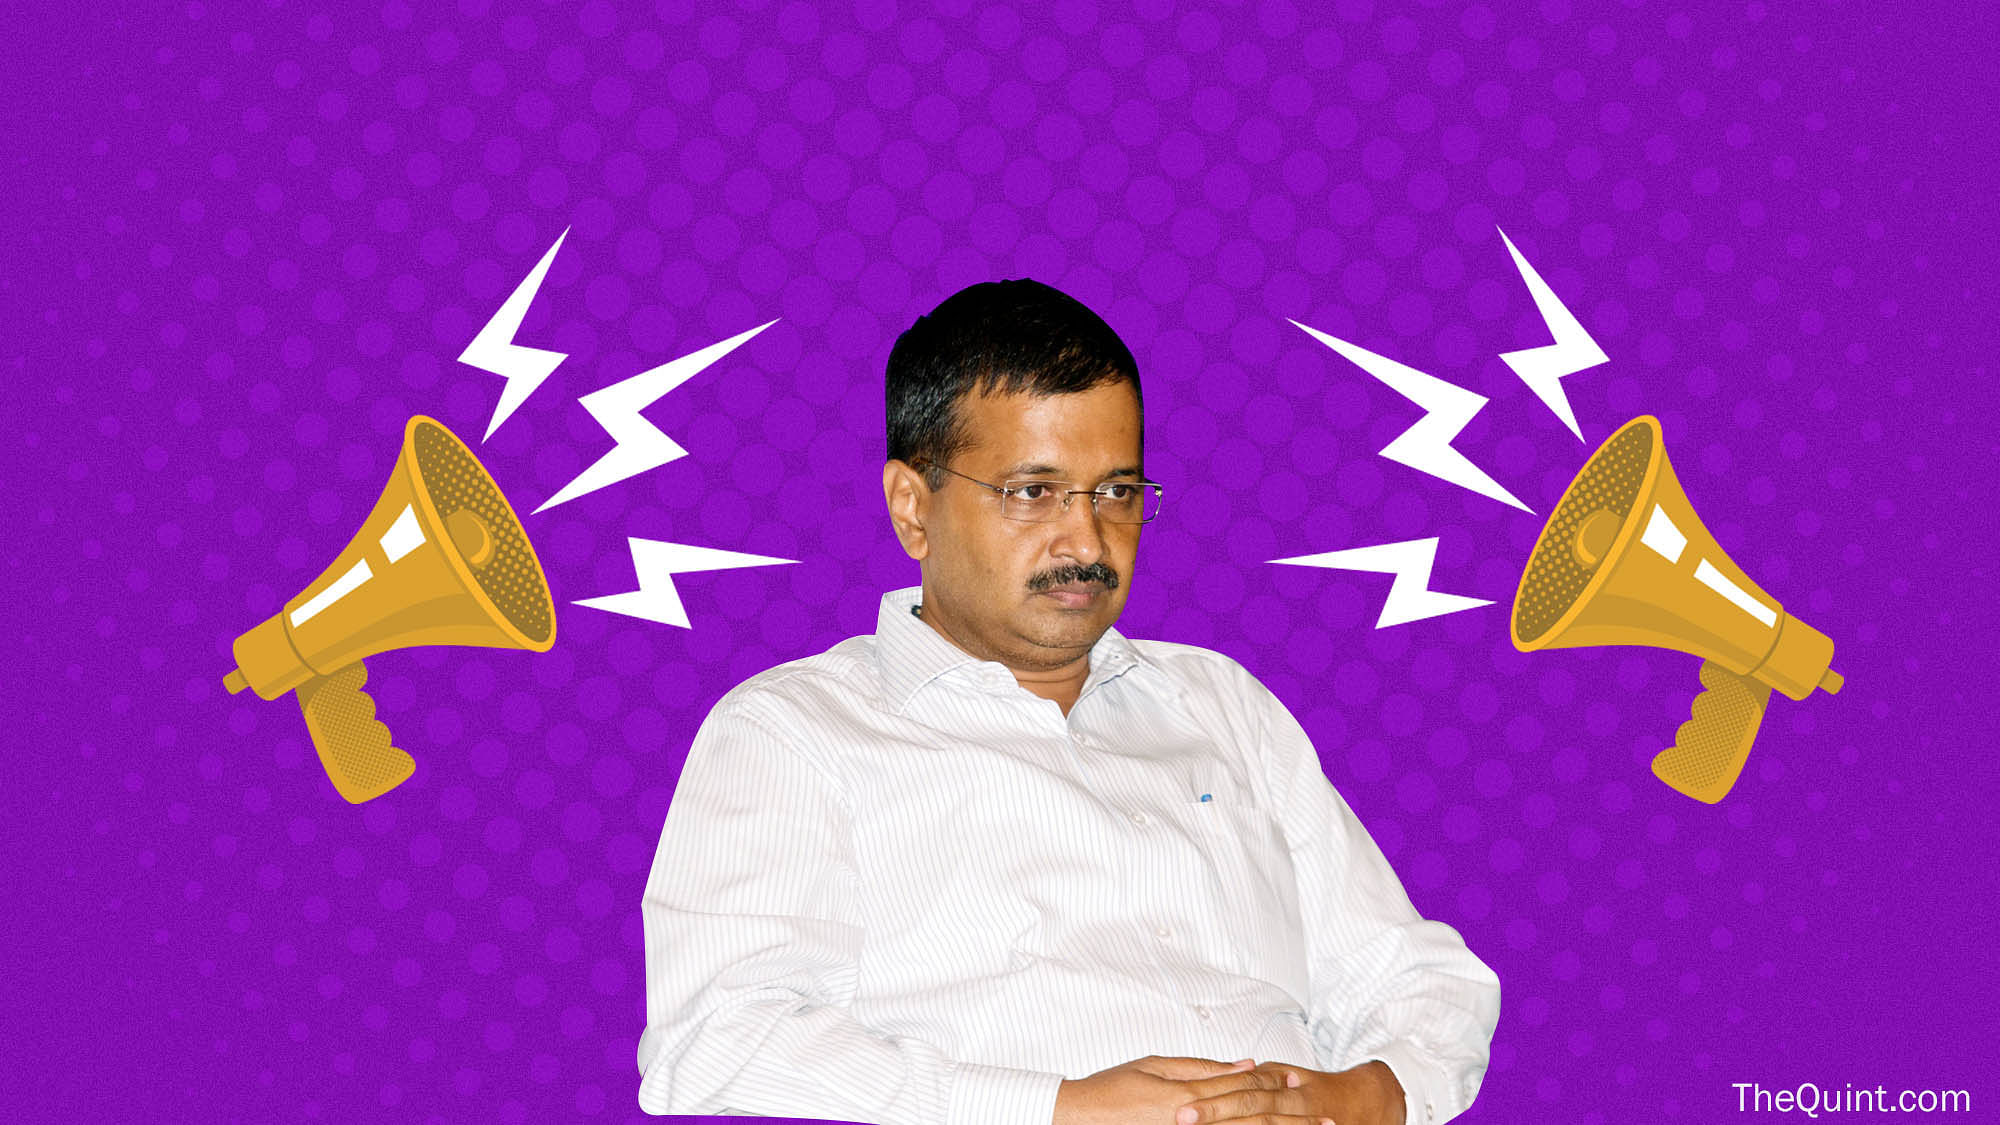 As early trends inclined in the BJP’s favour, strong reactions to Arvind Kejriwal and the AAP started surfacing. (Photo: Rhythum Seth/<b>The Quint</b>)